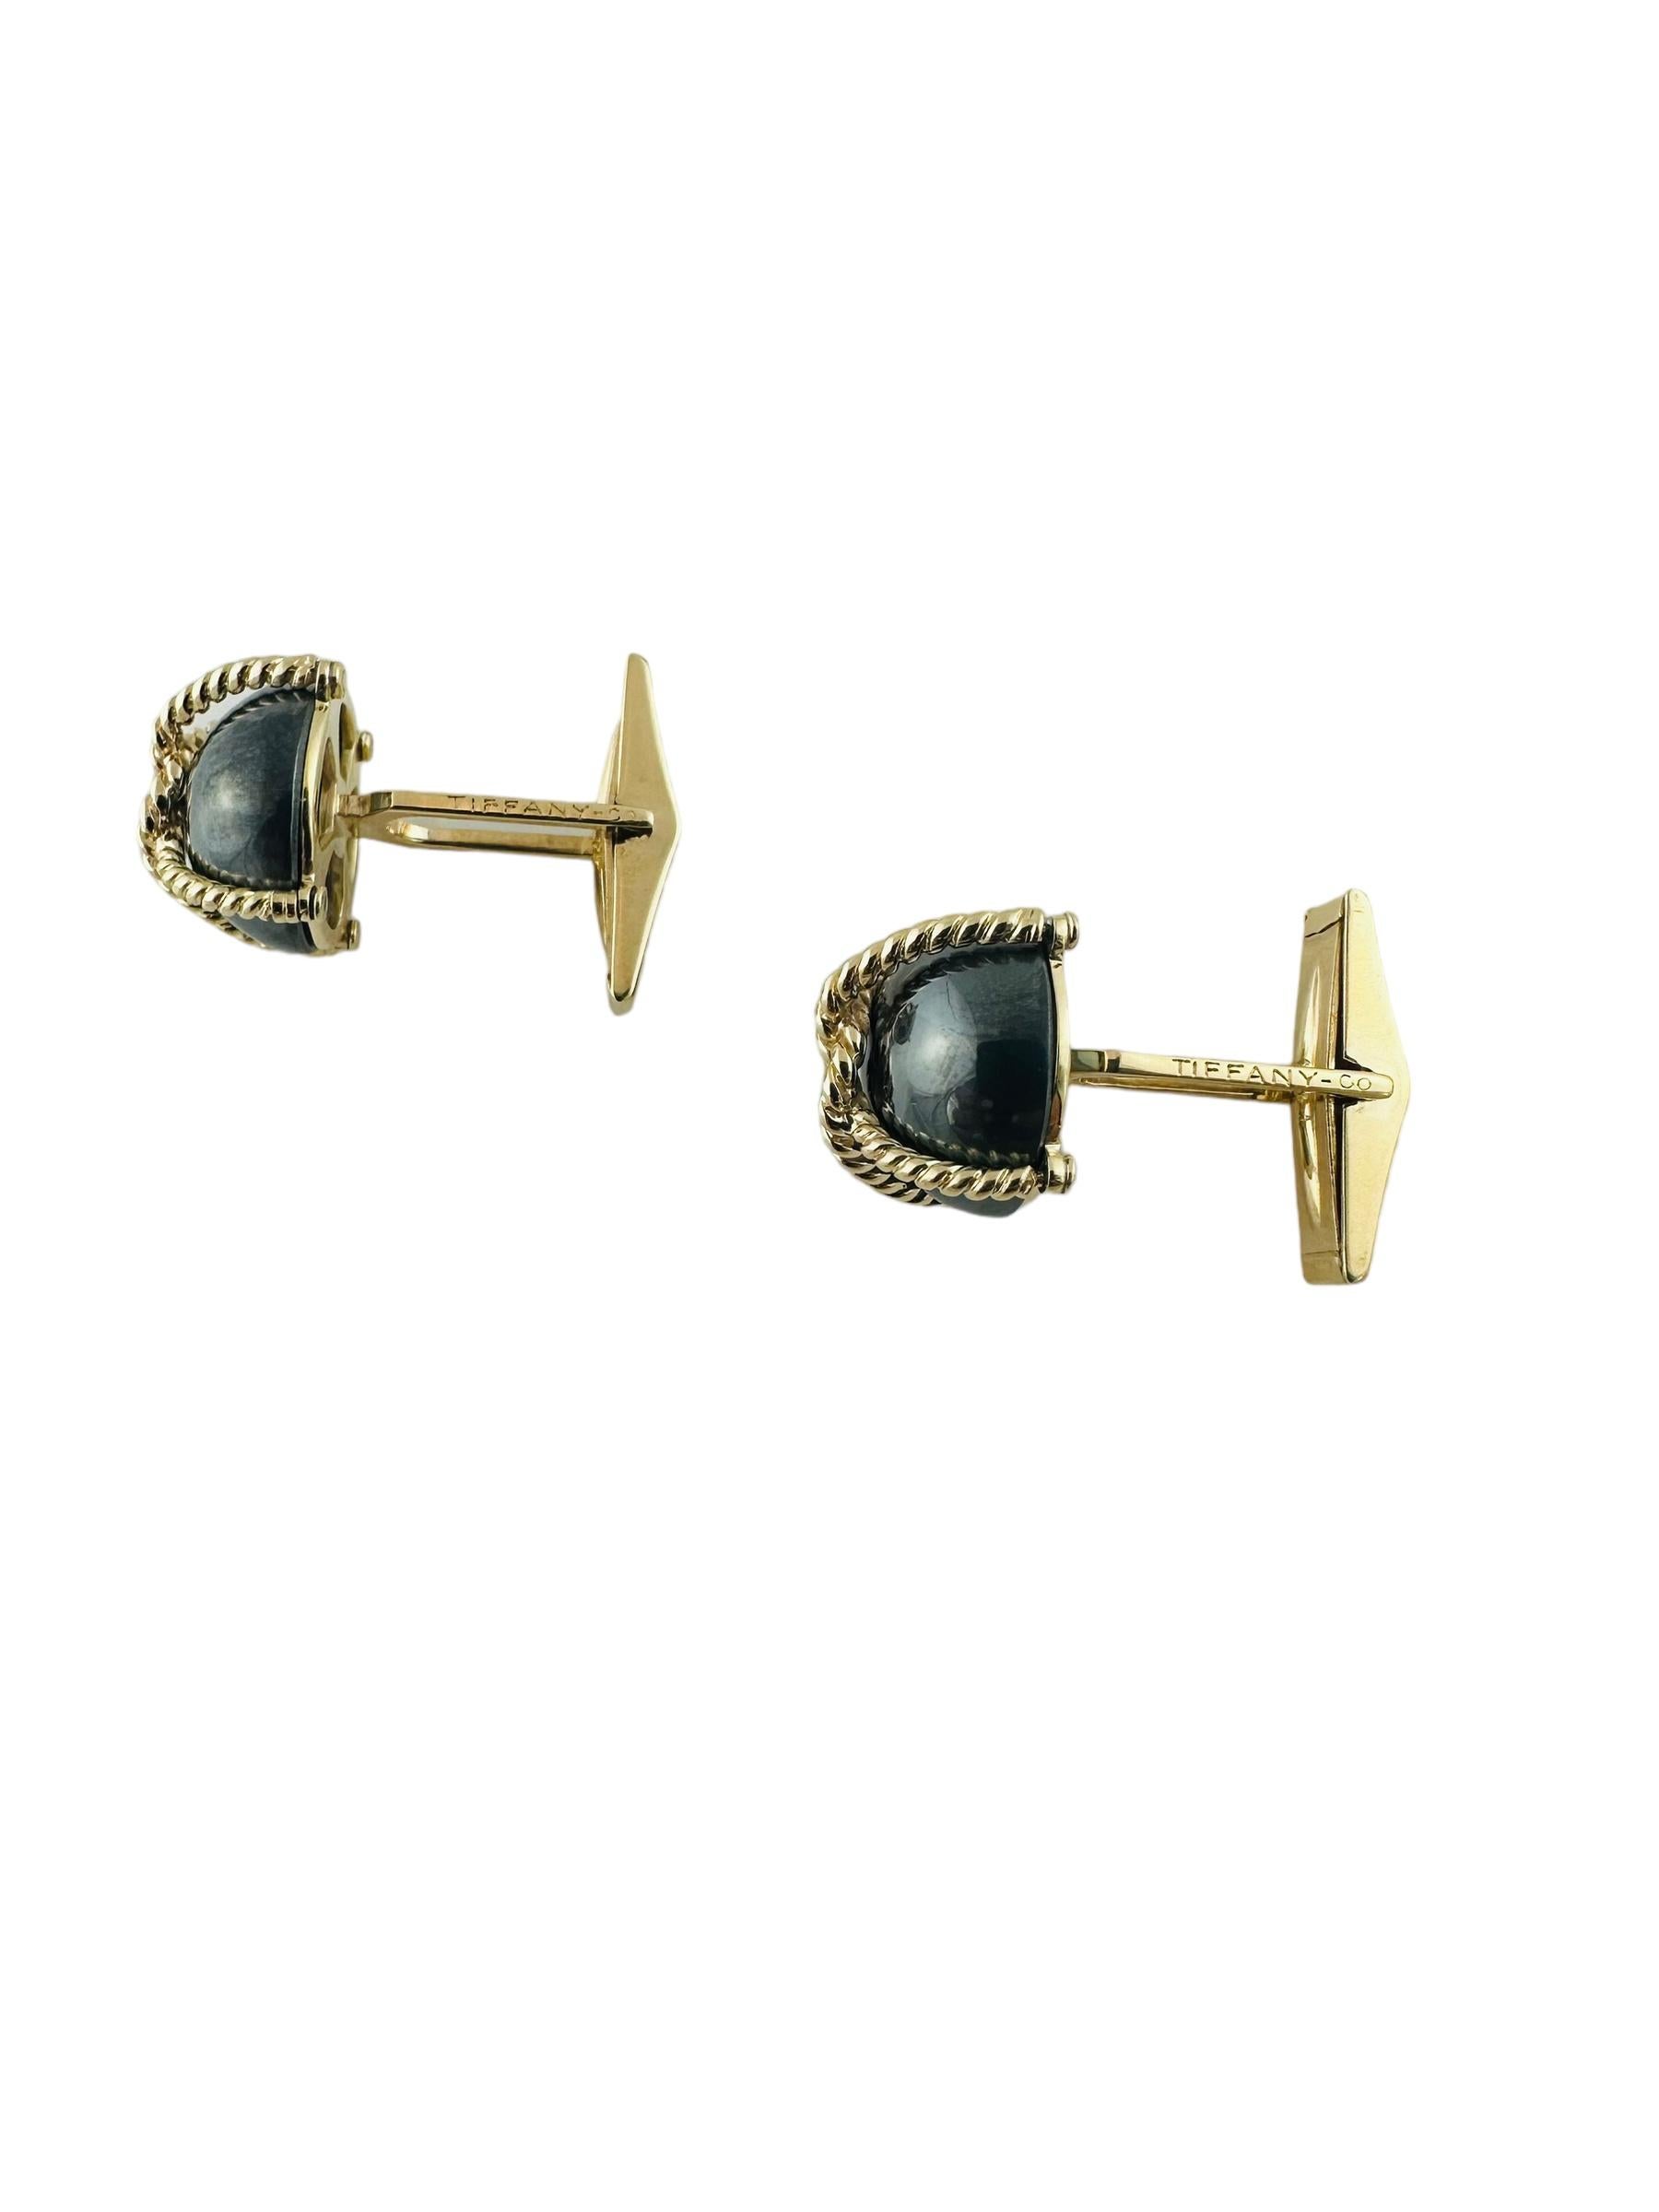 Cabochon Vintage Tiffany & Co. 14K Yellow Gold Hematite Cable Cufflinks For Sale